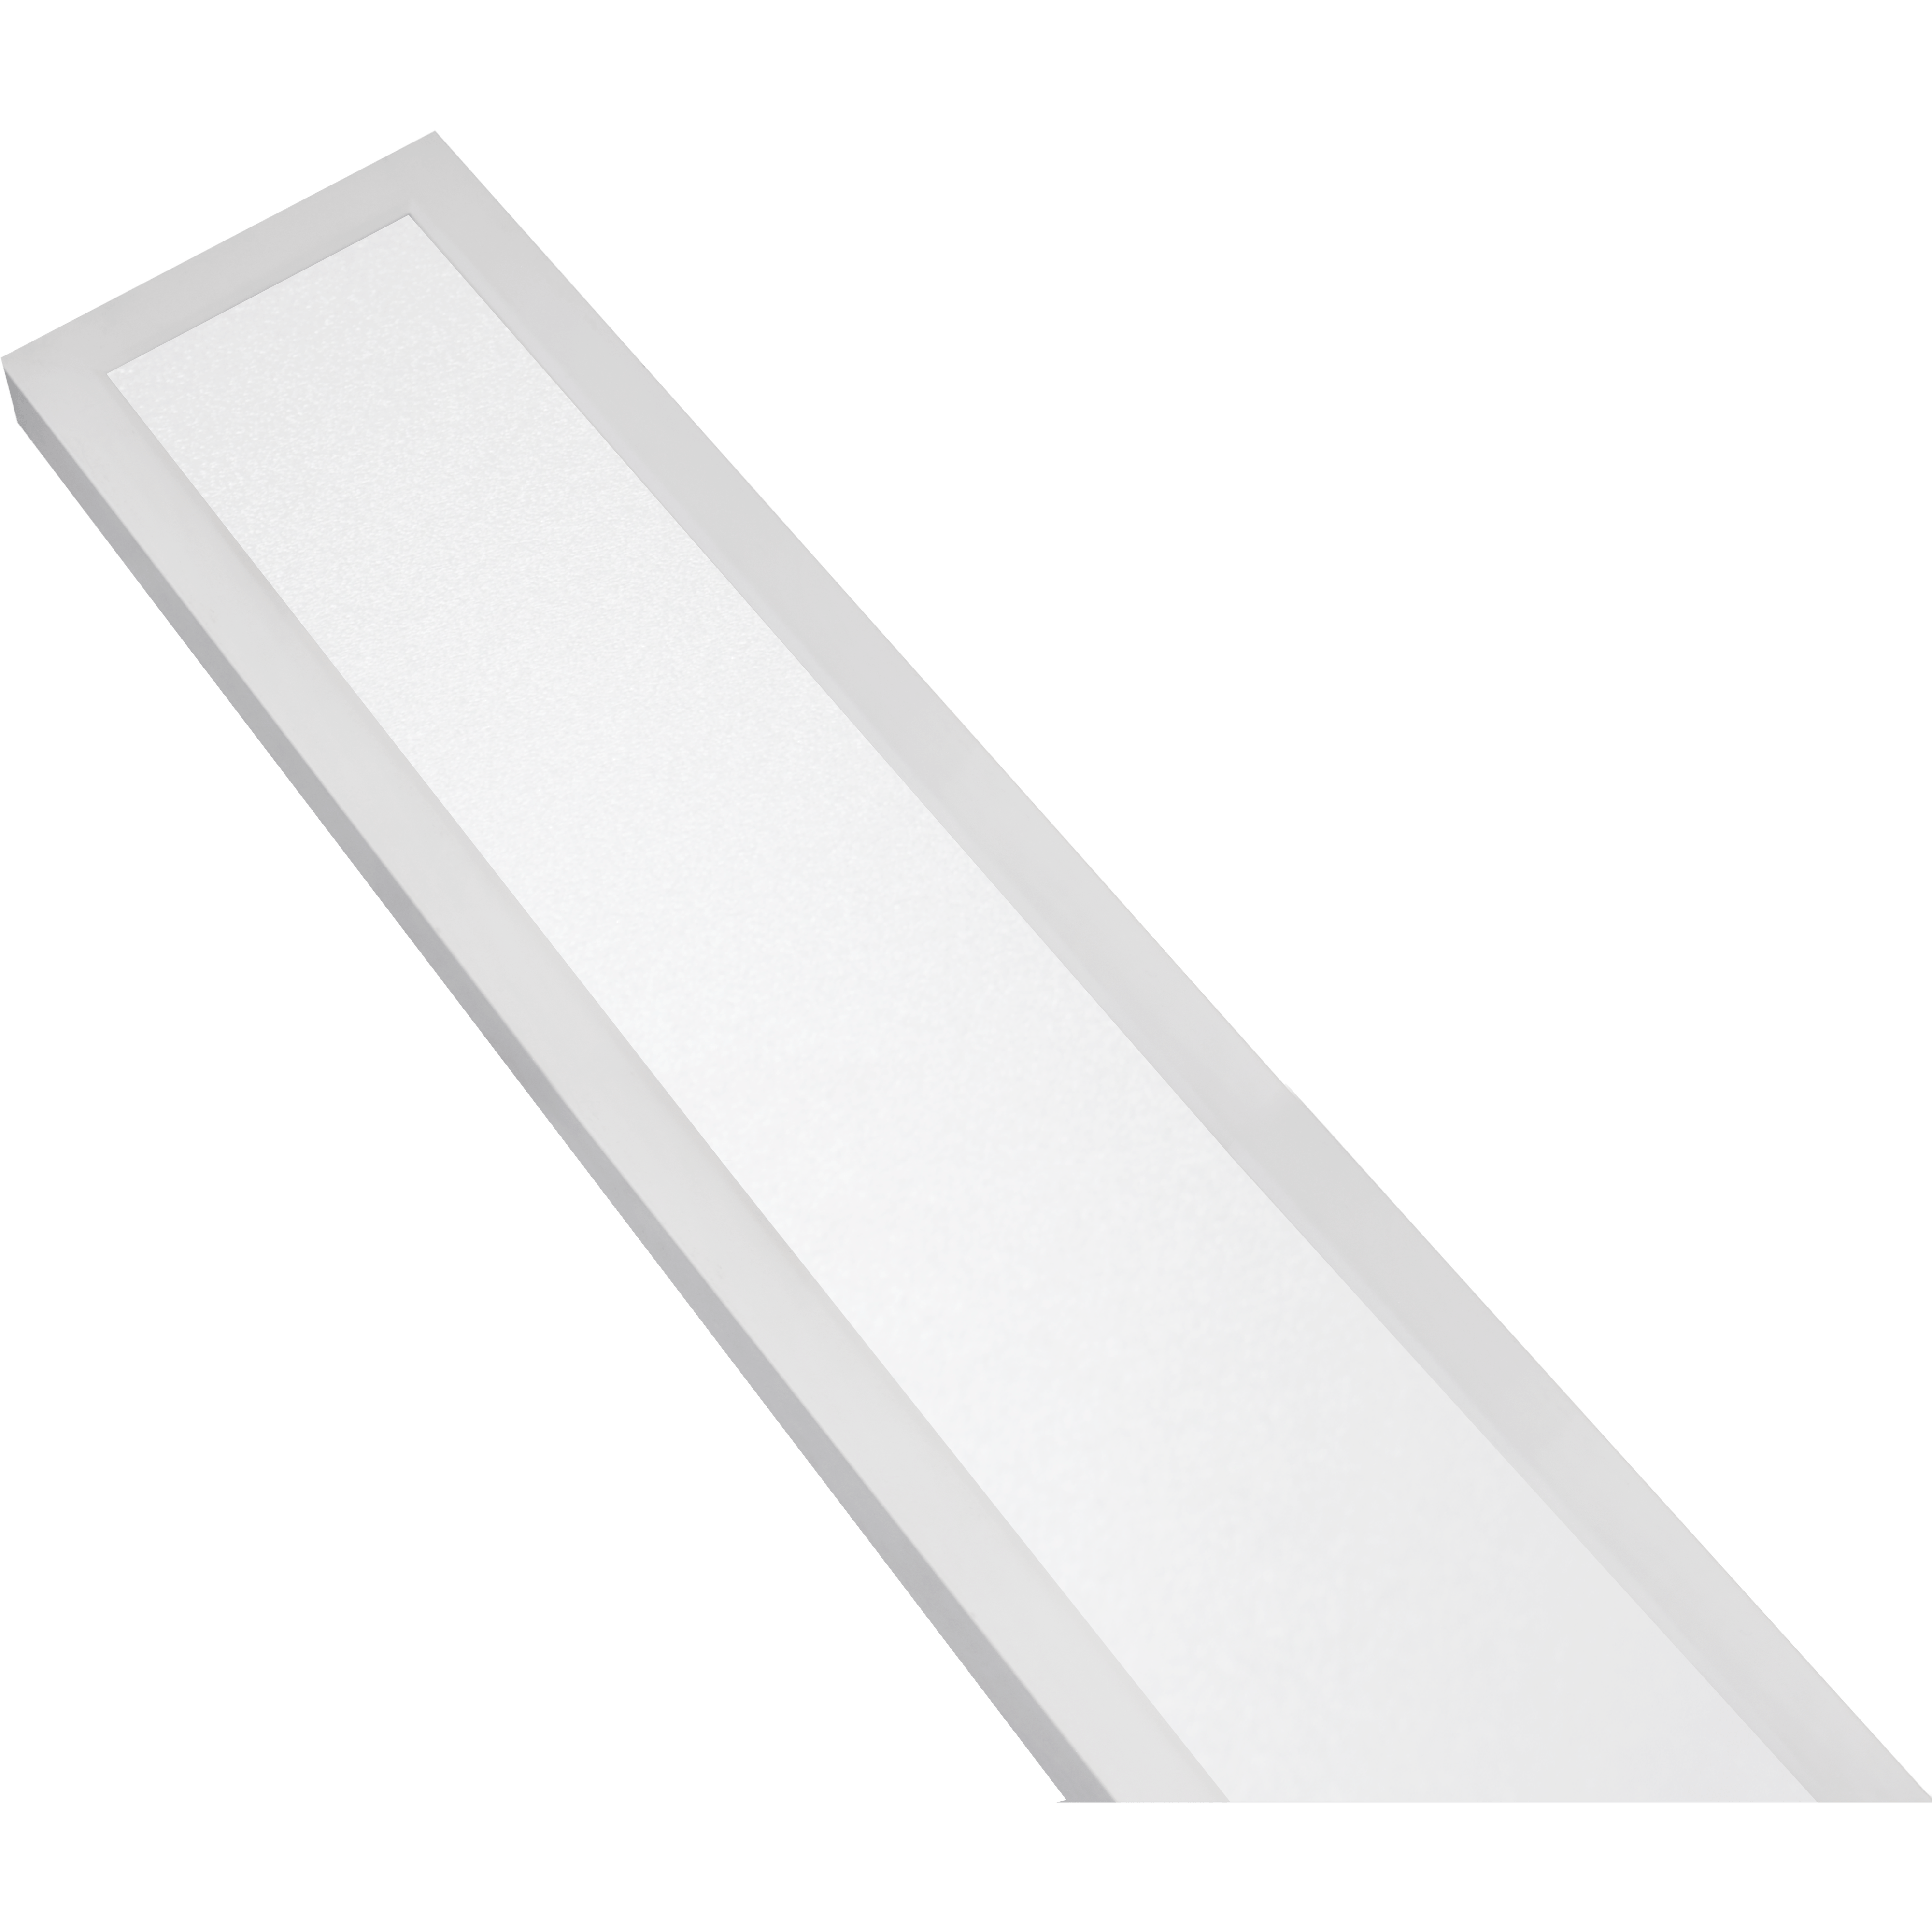 POE Texas Lighting Denton Linear Recessed PoE Lights - 4 in x 8 ft (Surface)